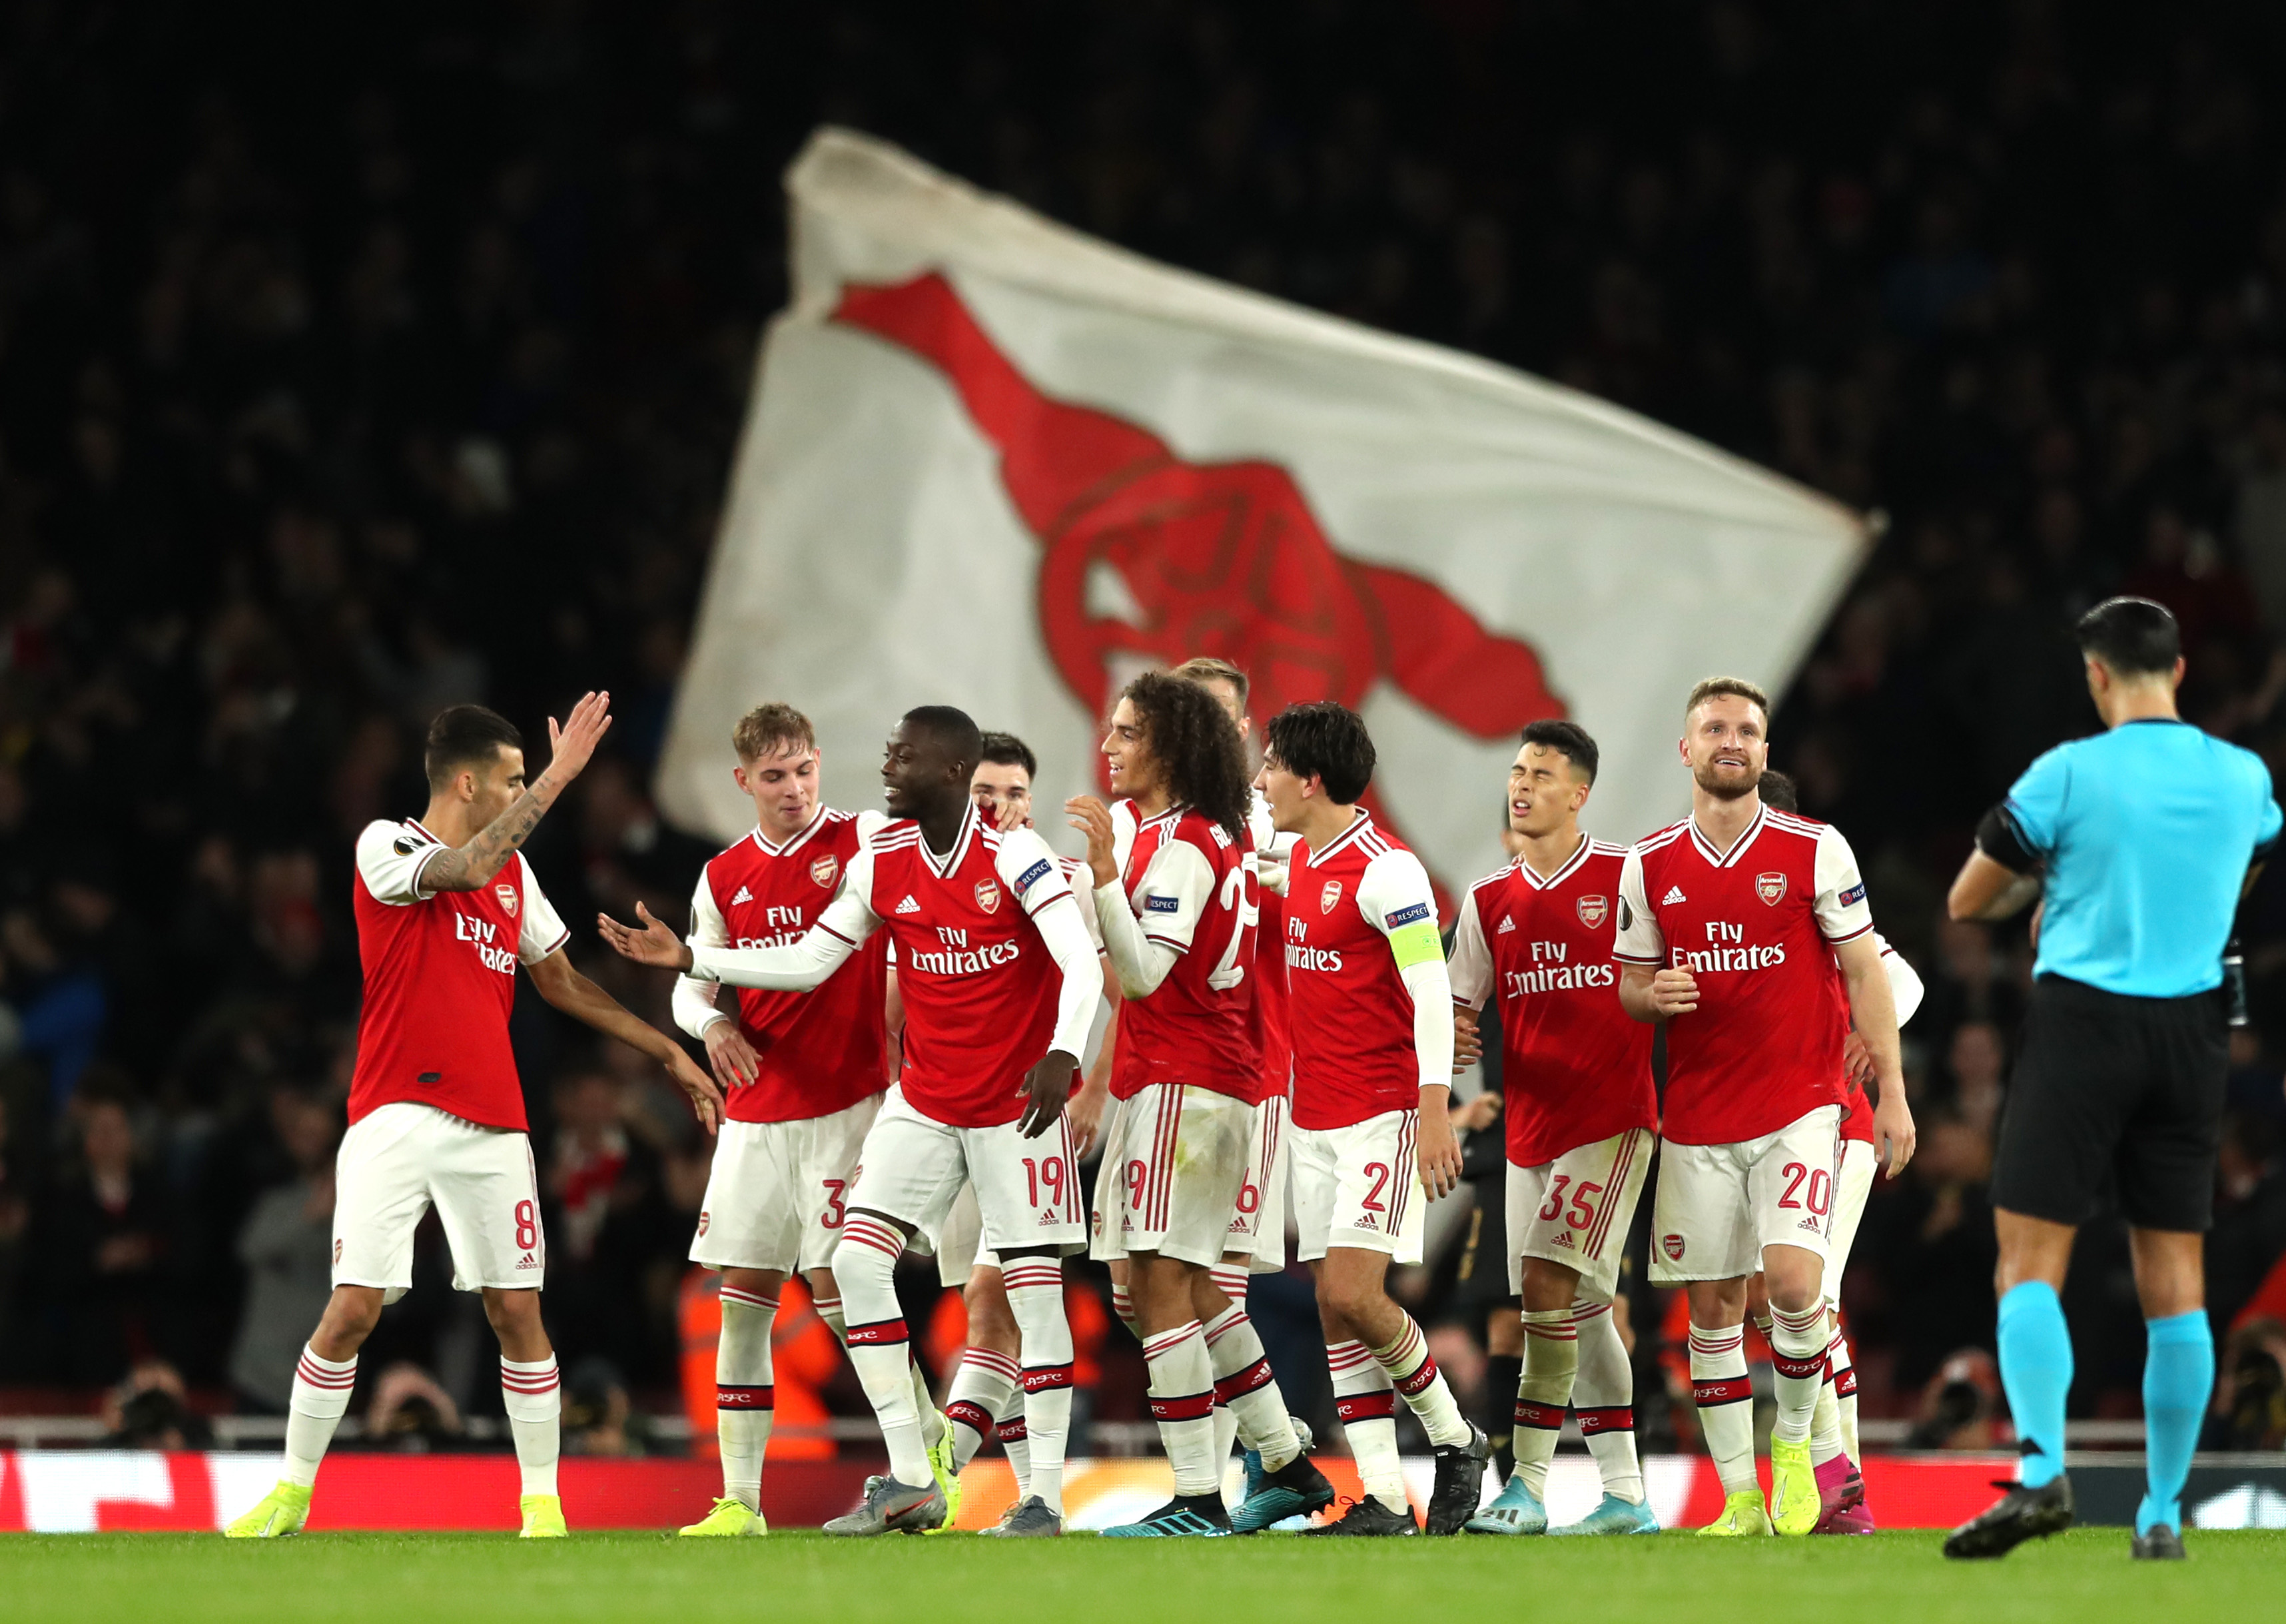 LONDON, ENGLAND - OCTOBER 24: Nicolas Pepe of Arsenal celebrates with team mates after scoring his team's third goal during the UEFA Europa League group F match between Arsenal FC and Vitoria Guimaraes at Emirates Stadium on October 24, 2019 in London, United Kingdom. (Photo by Naomi Baker/Getty Images)